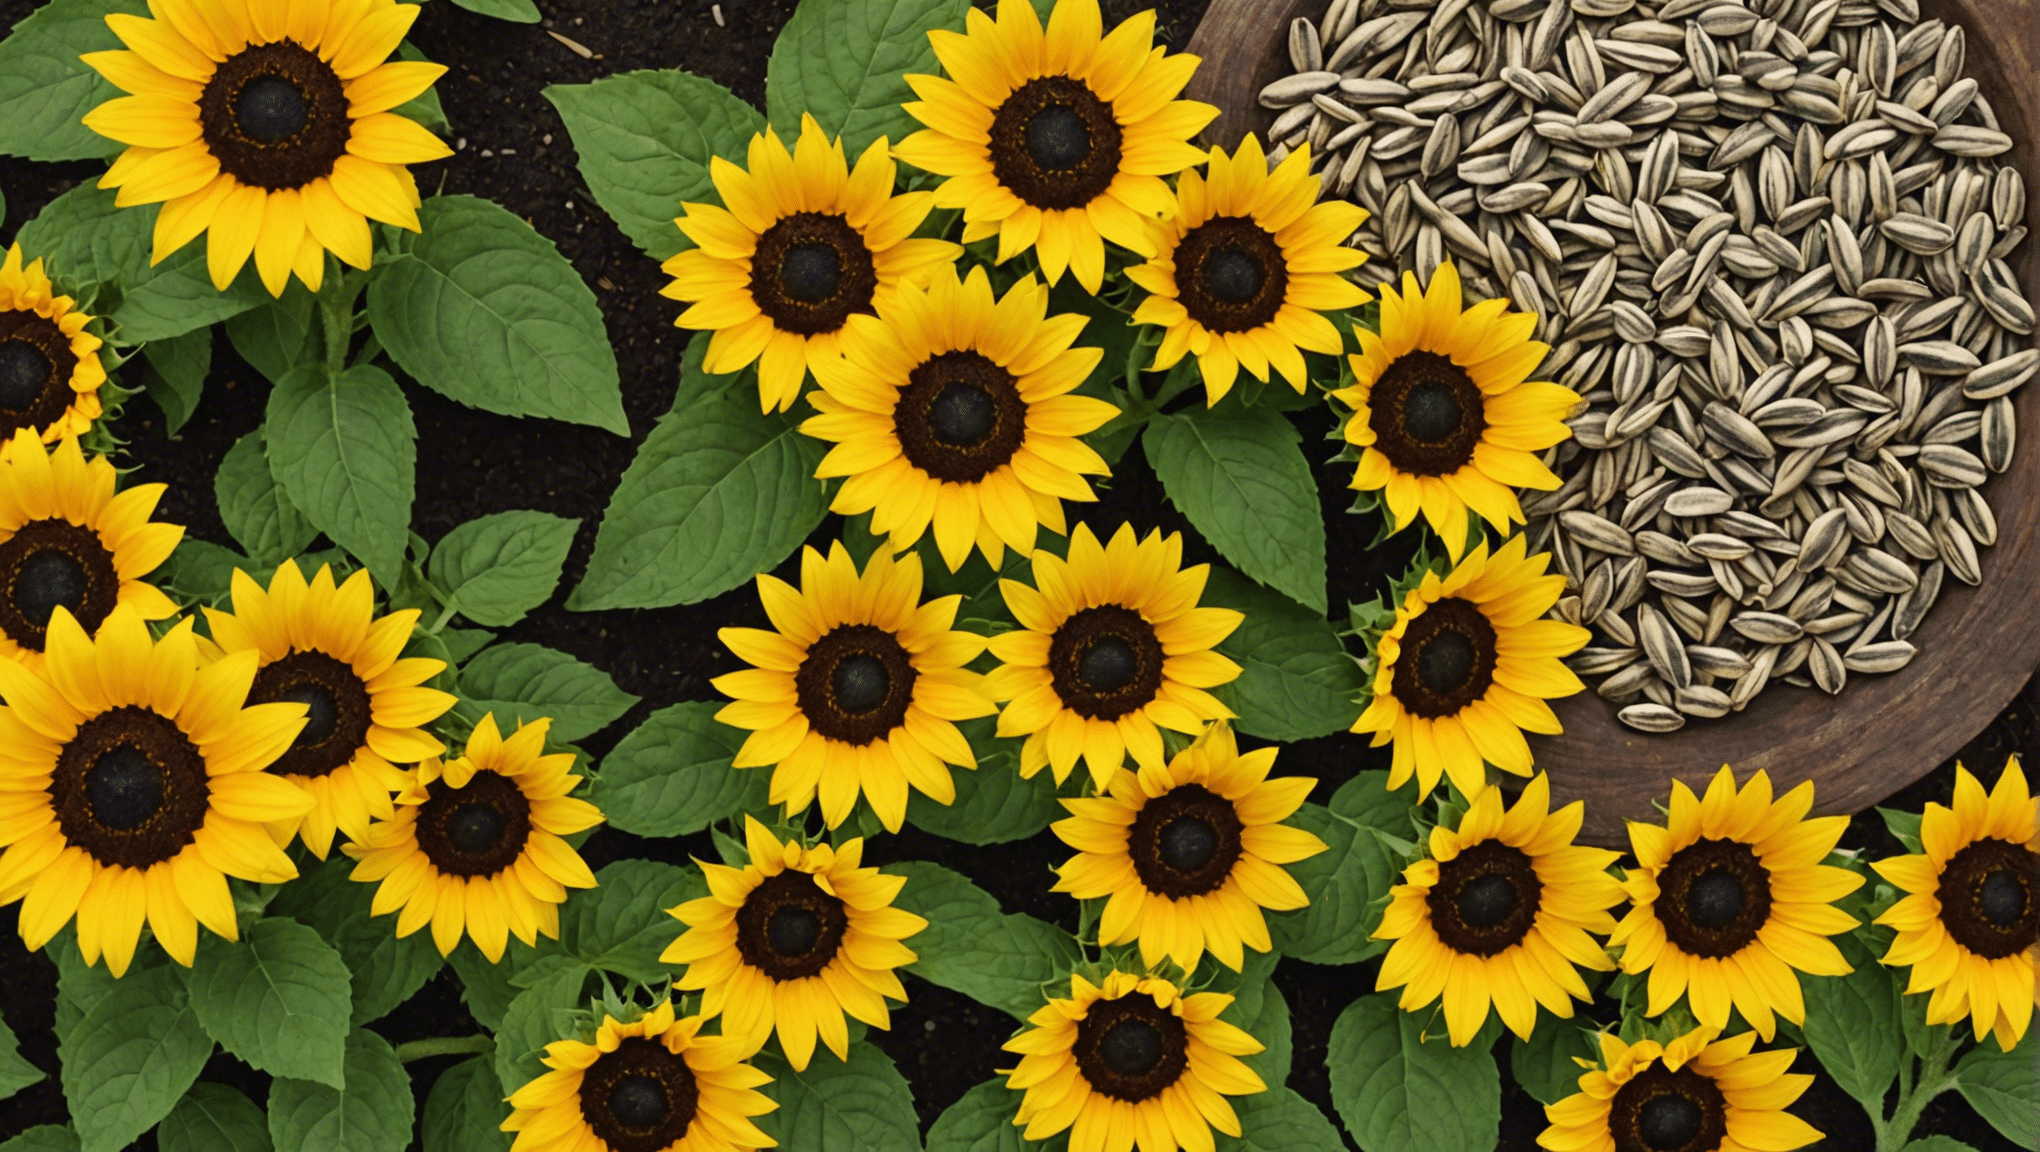 discover the reasons behind the growing popularity of chinook sunflower seeds as a snack choice. find out what makes them stand out and why they are increasingly preferred by consumers.